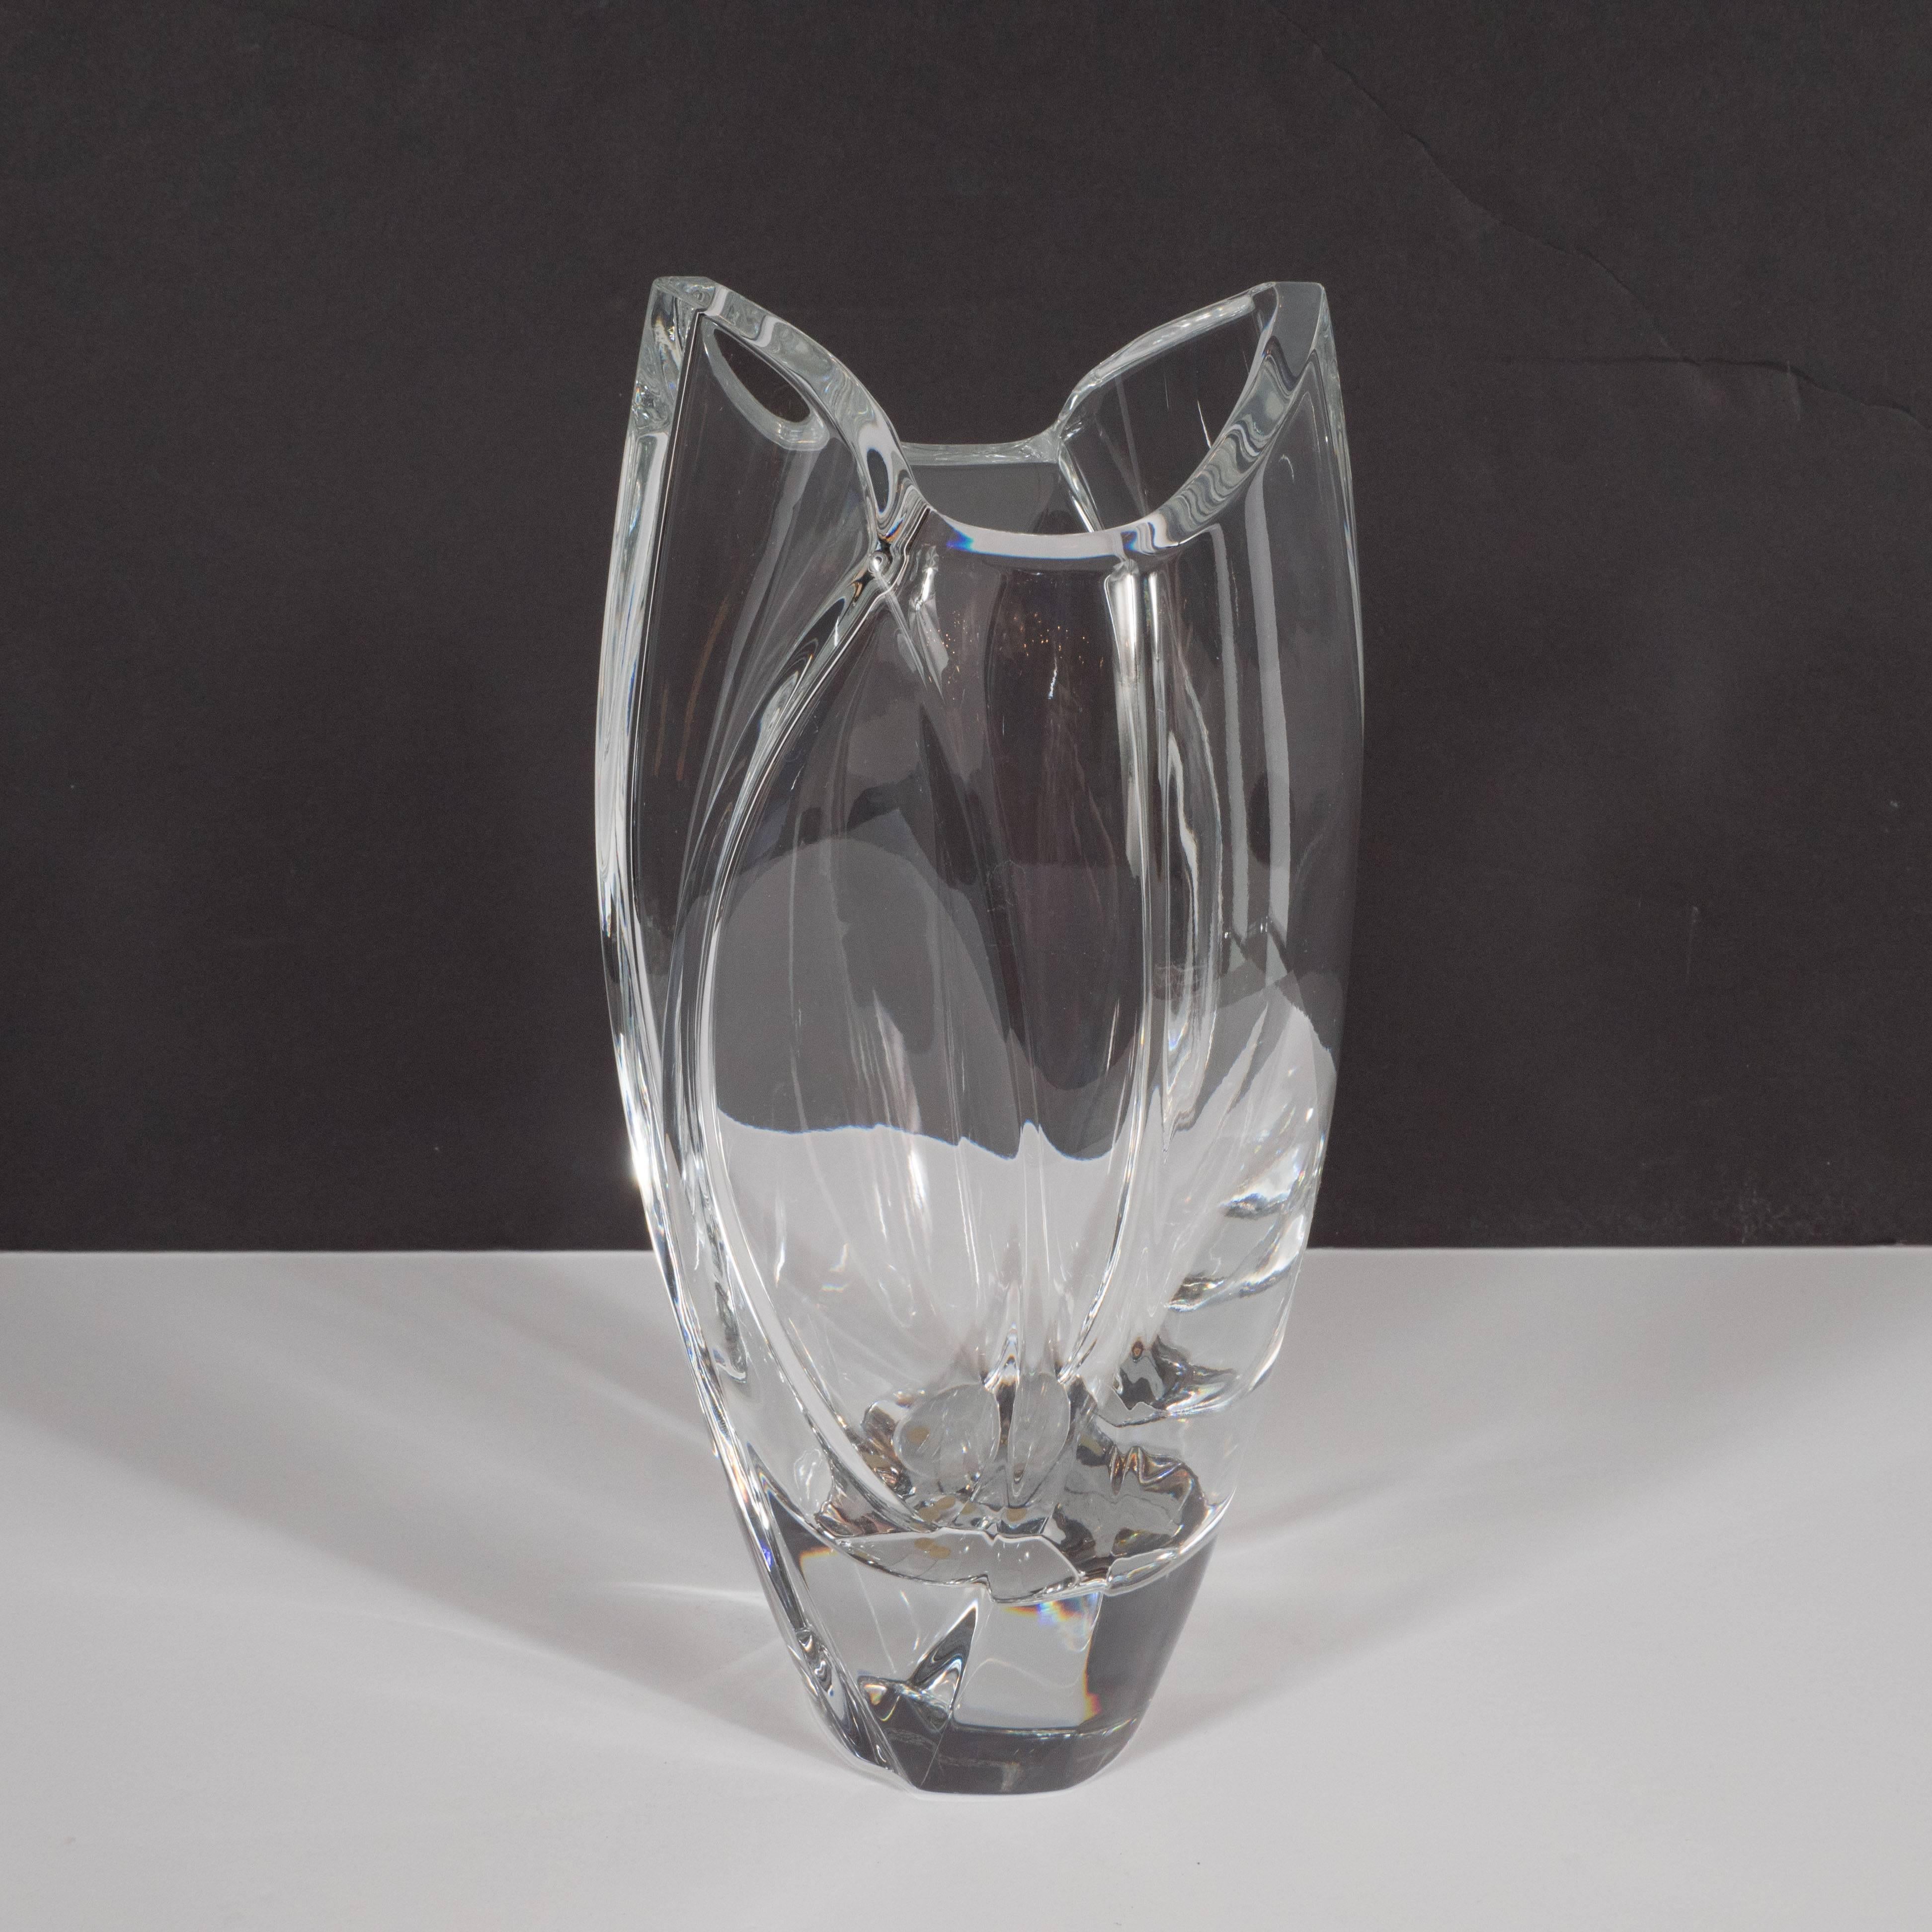 Blown Glass Mid-Century Modern Hexagonal Translucent Glass Vase by Baccarat of France